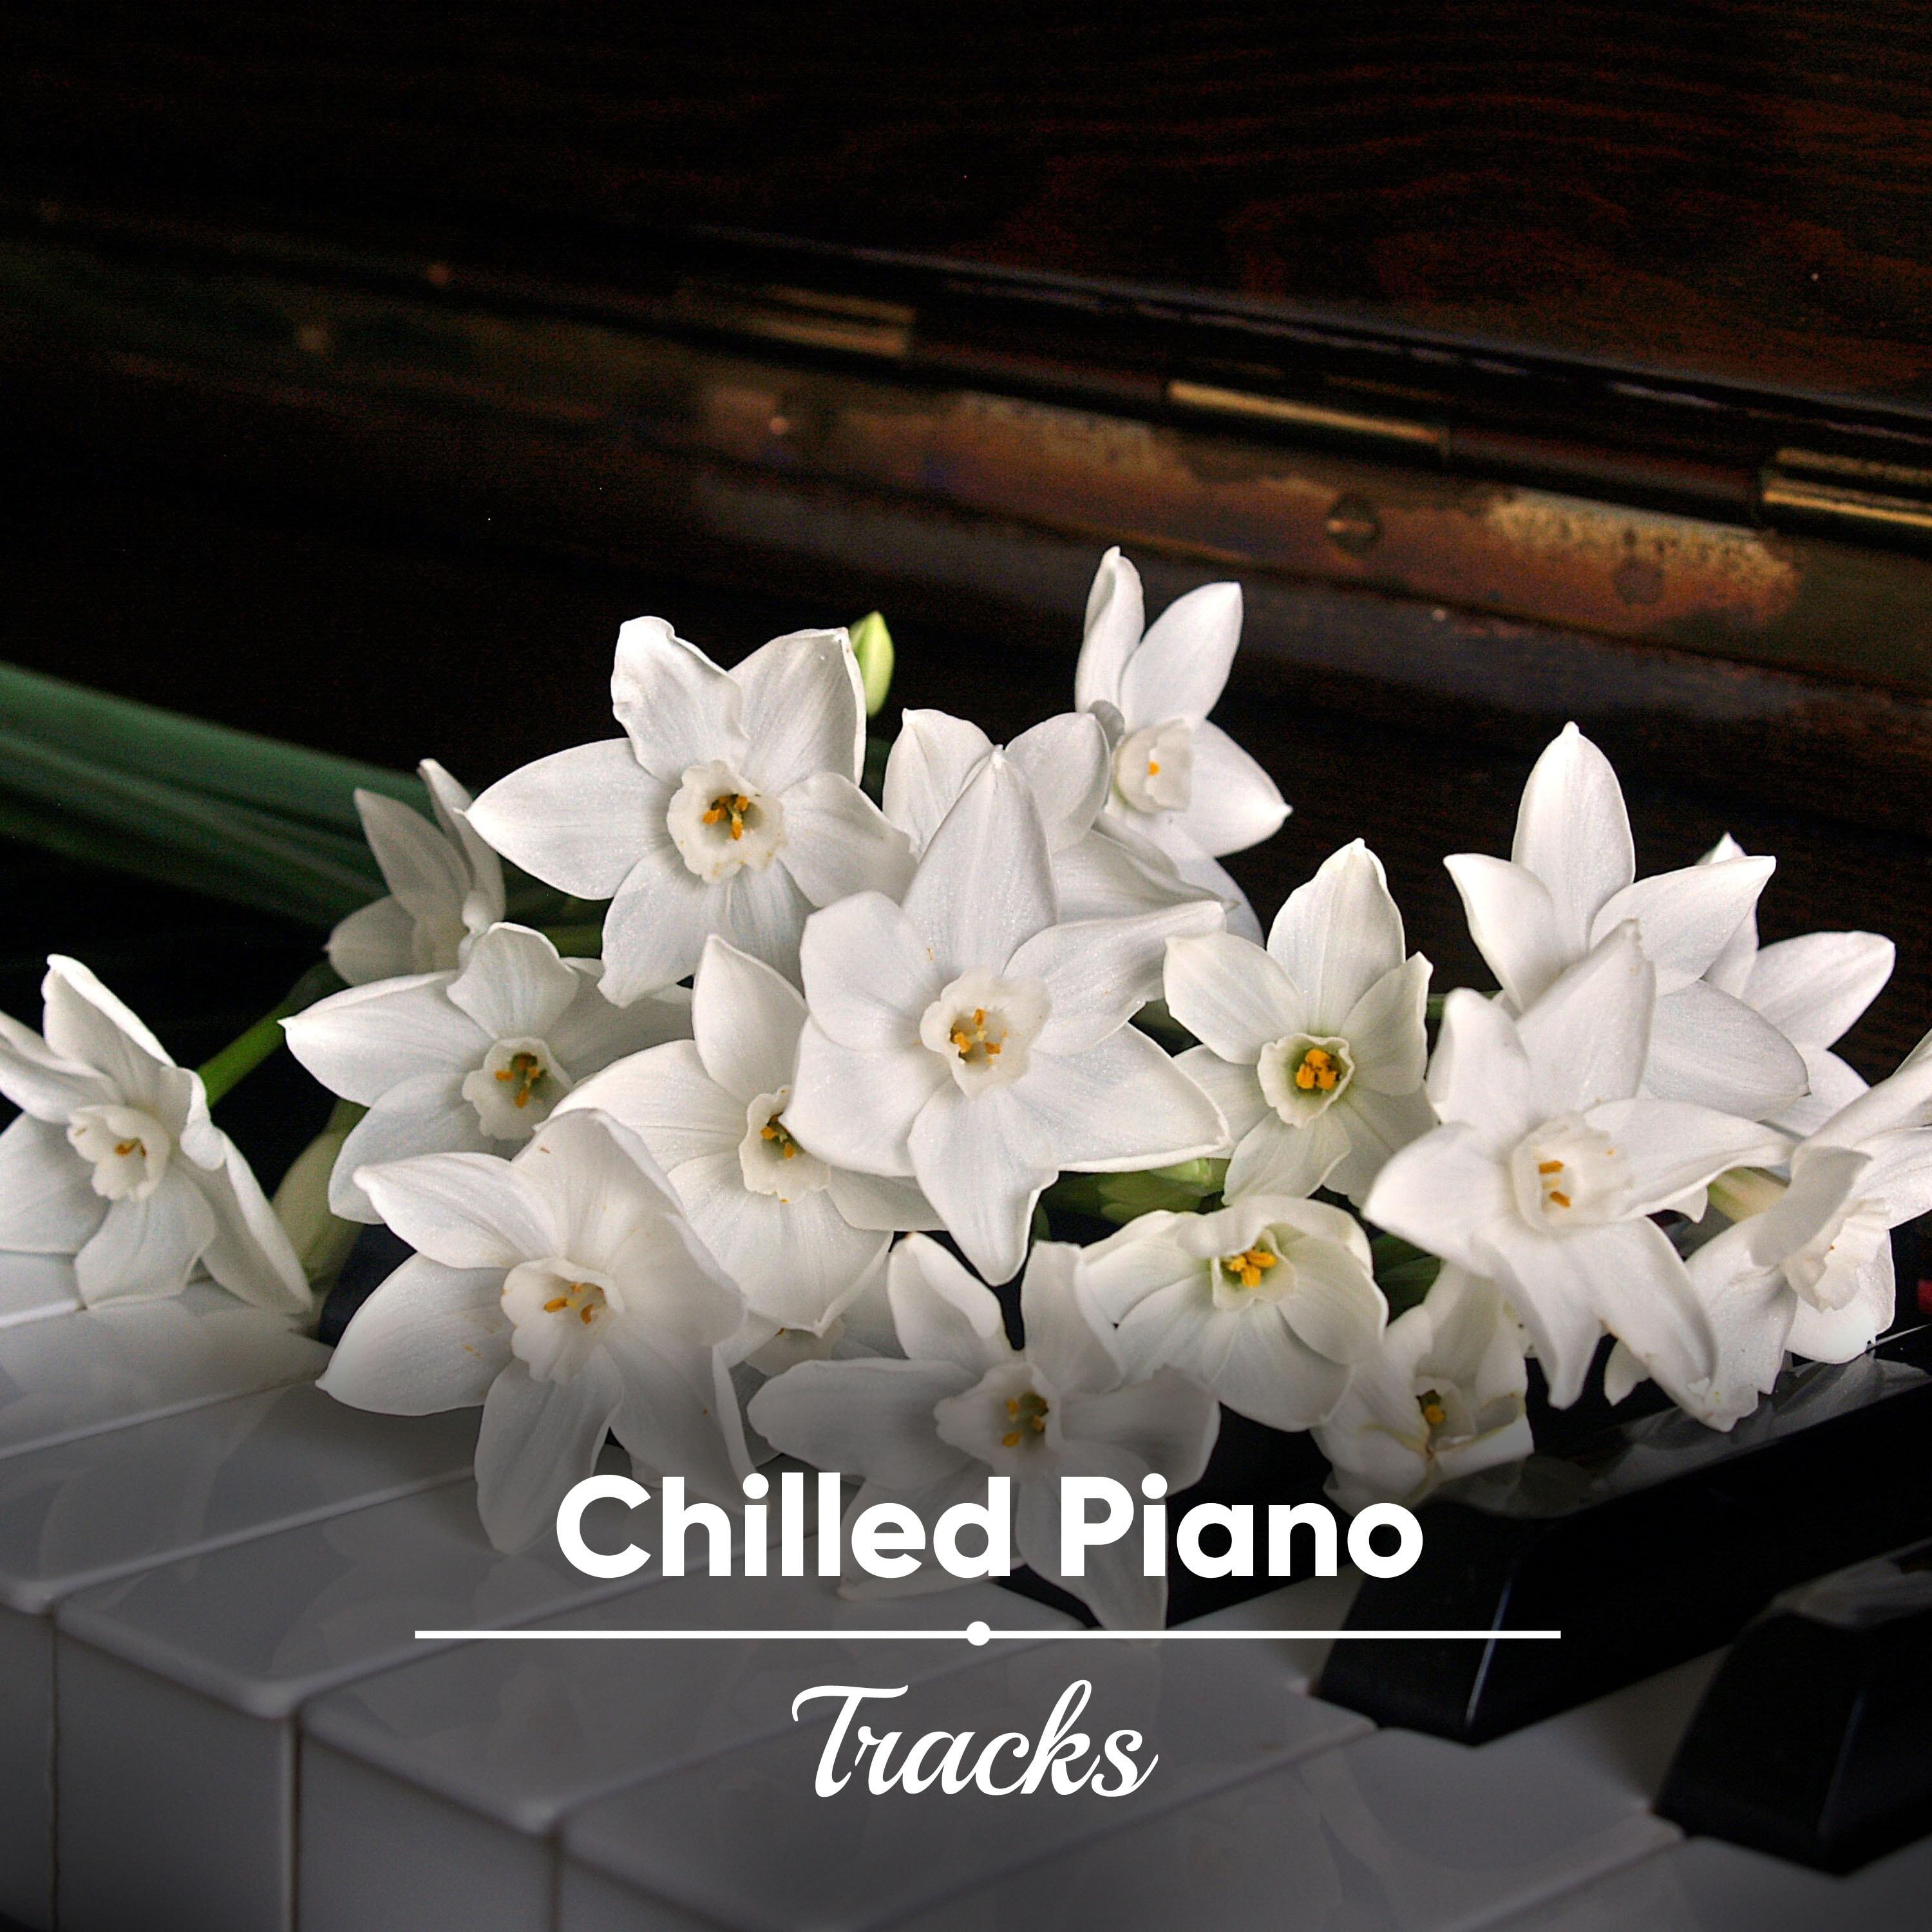 #19 Chilled Piano Tracks